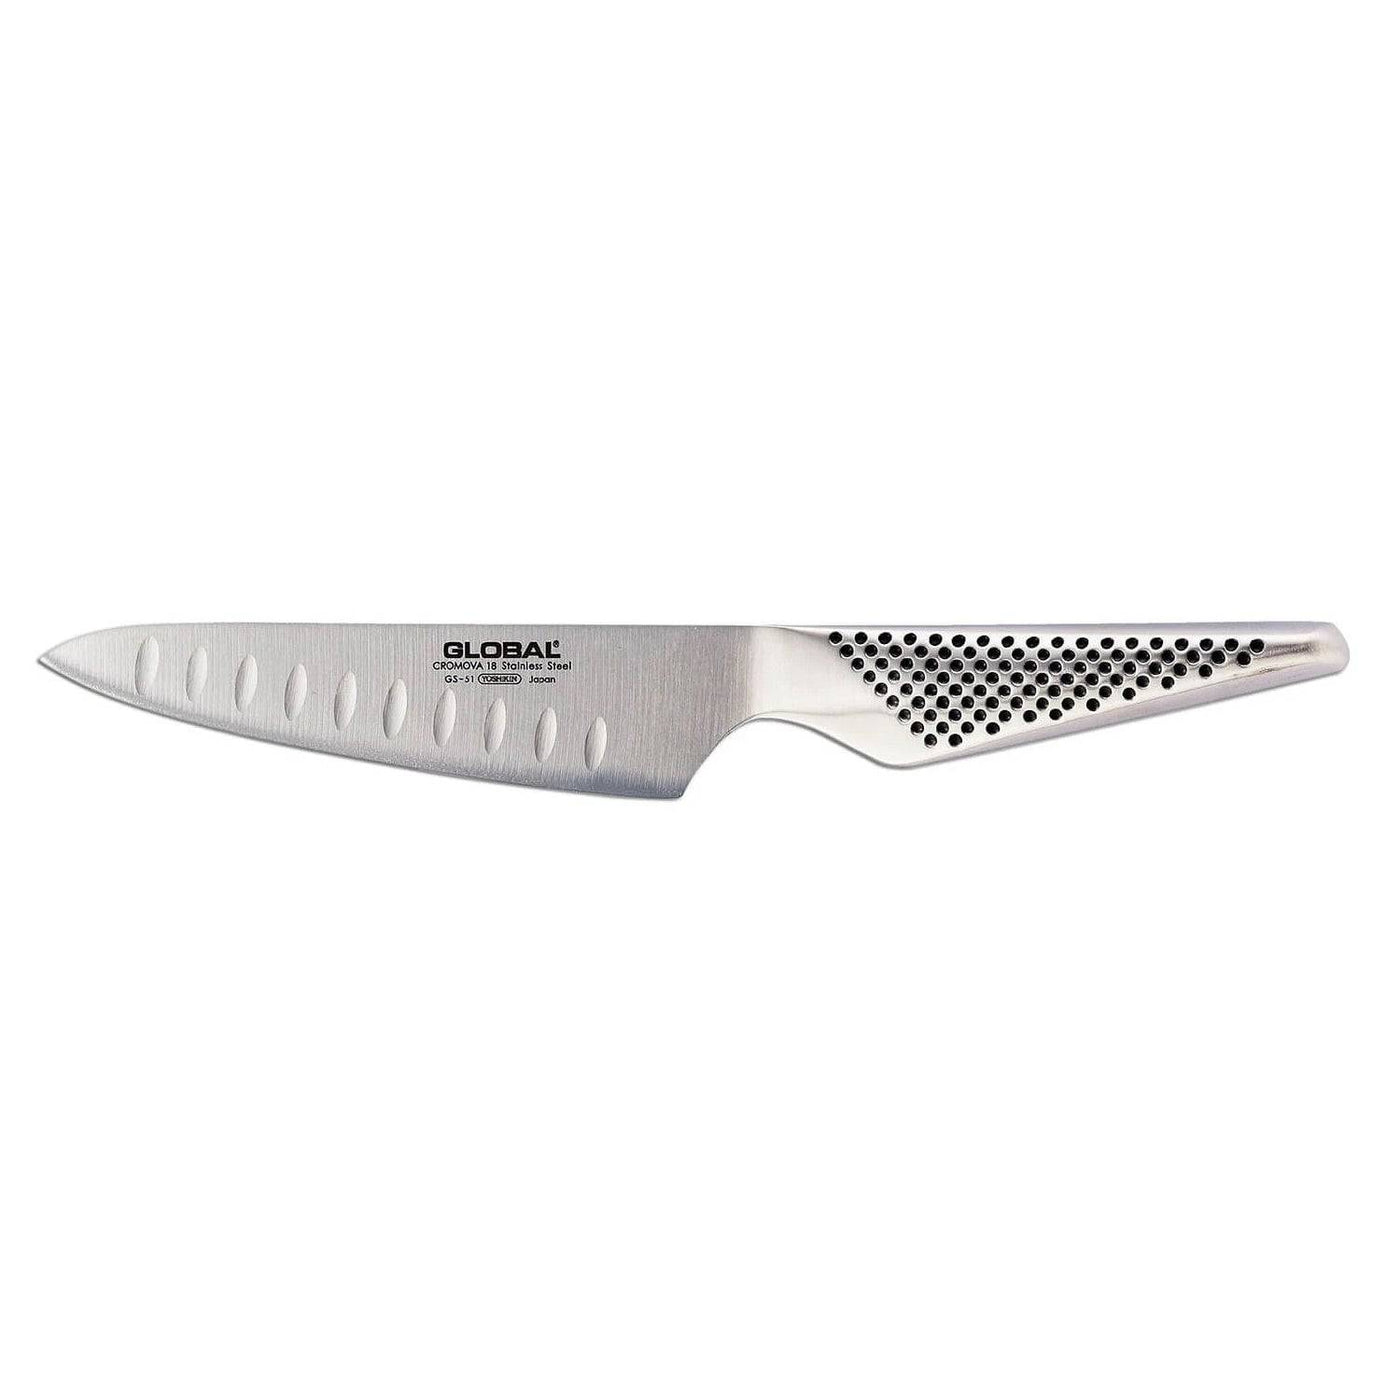 Global Classic Stainless Steel Fluted Chef's Knife, 5-Inches - Kitchen Universe